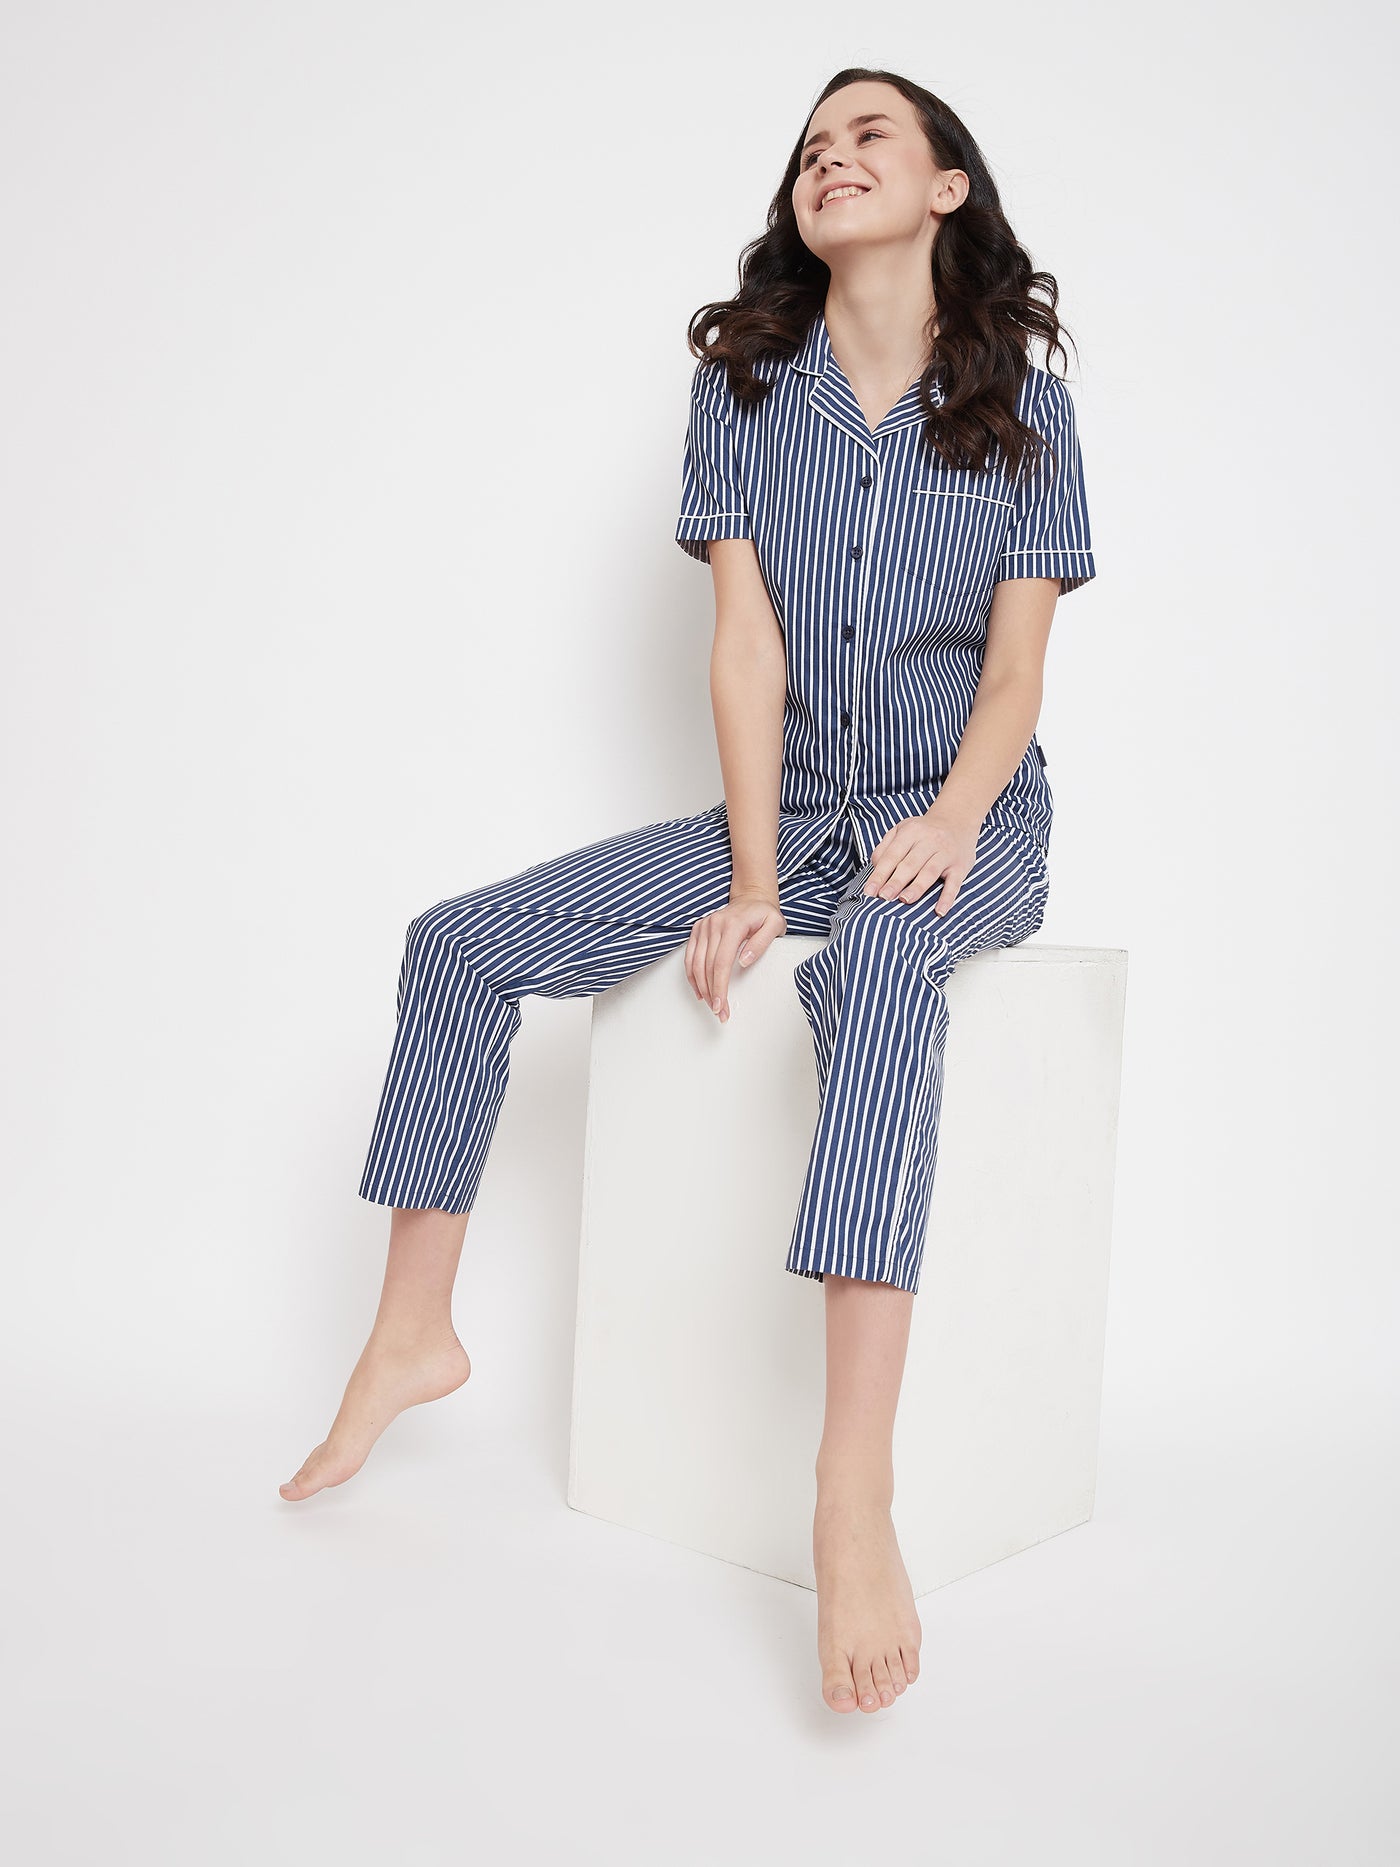 Blue Striped Slim Fit Night Suits - Women Night Suits